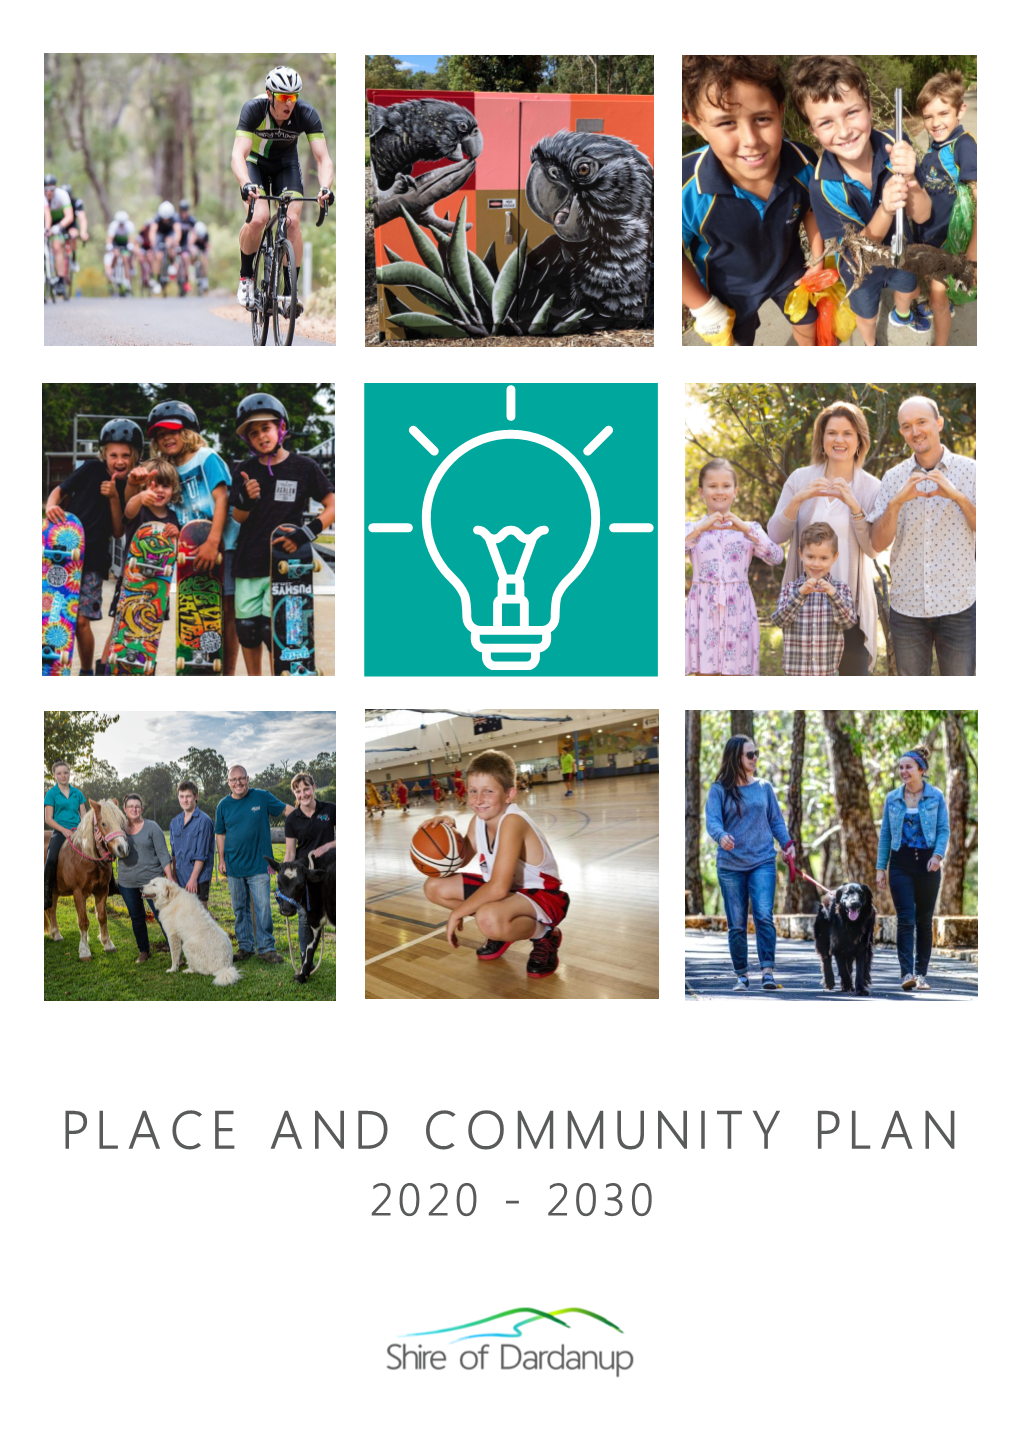 Place and Community Plan) Annual Budget (1-Year) Measurement and Reporting